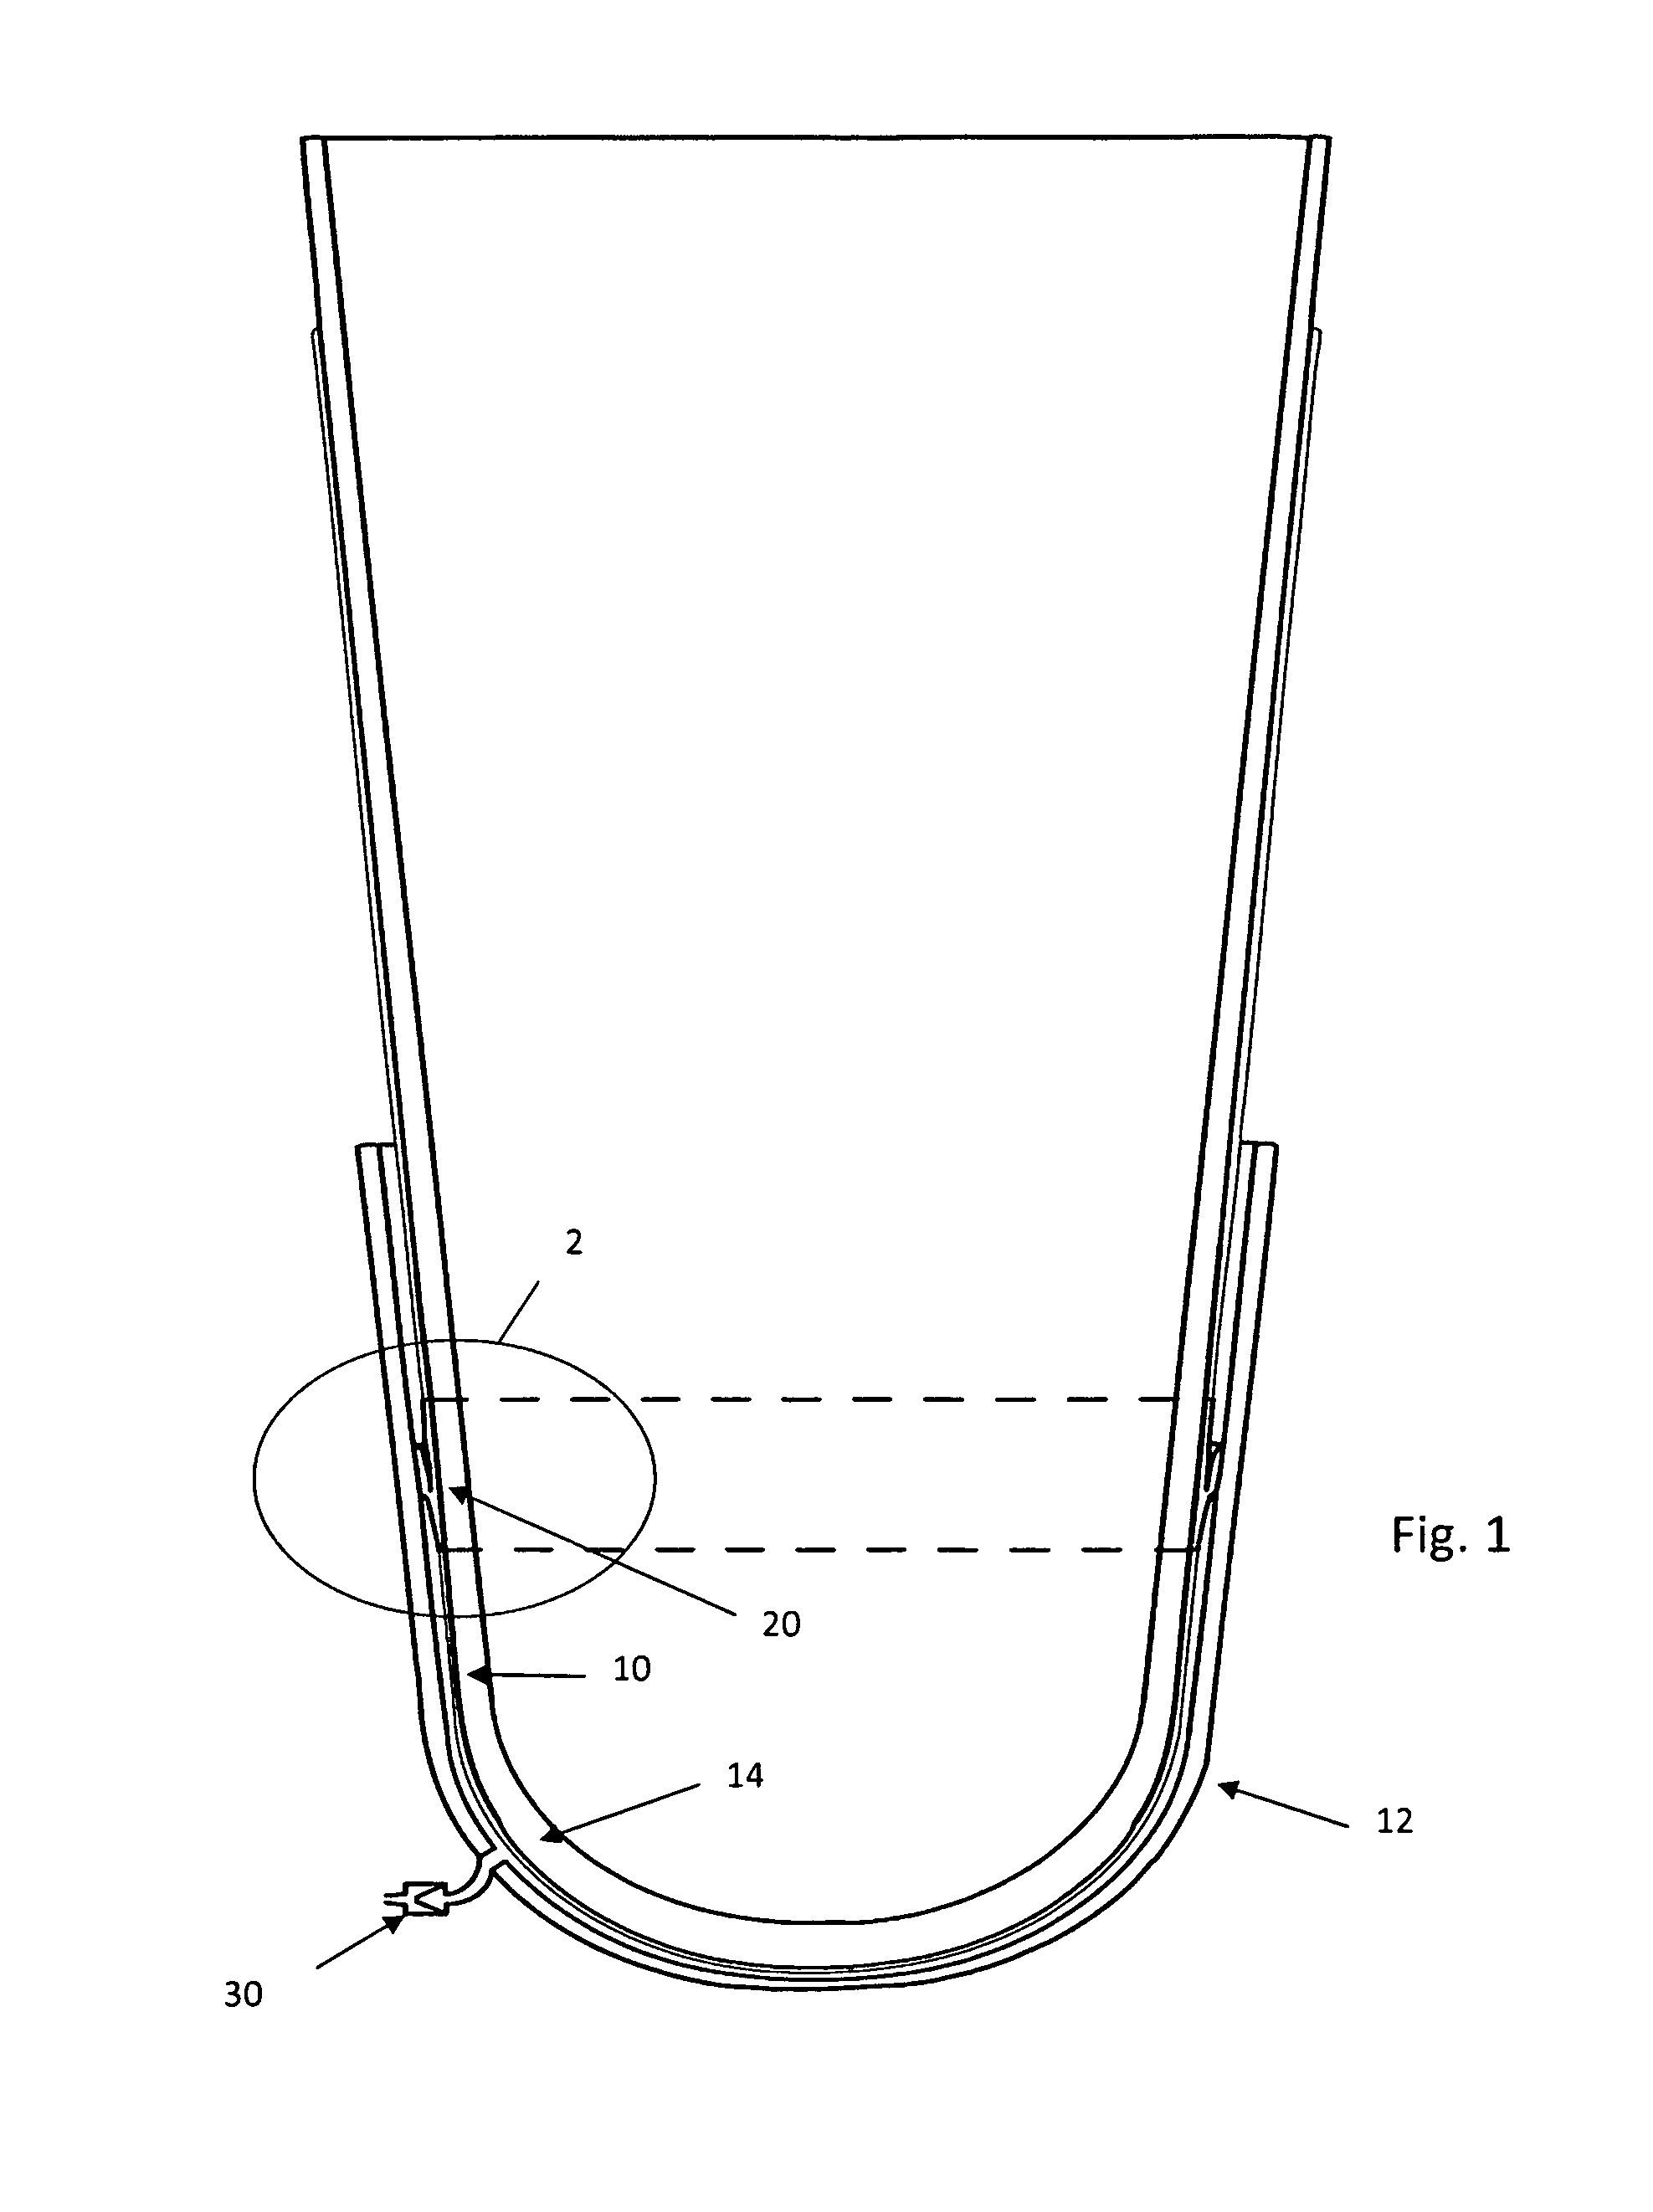 Sealing sheath for prosthetic liner and related methods